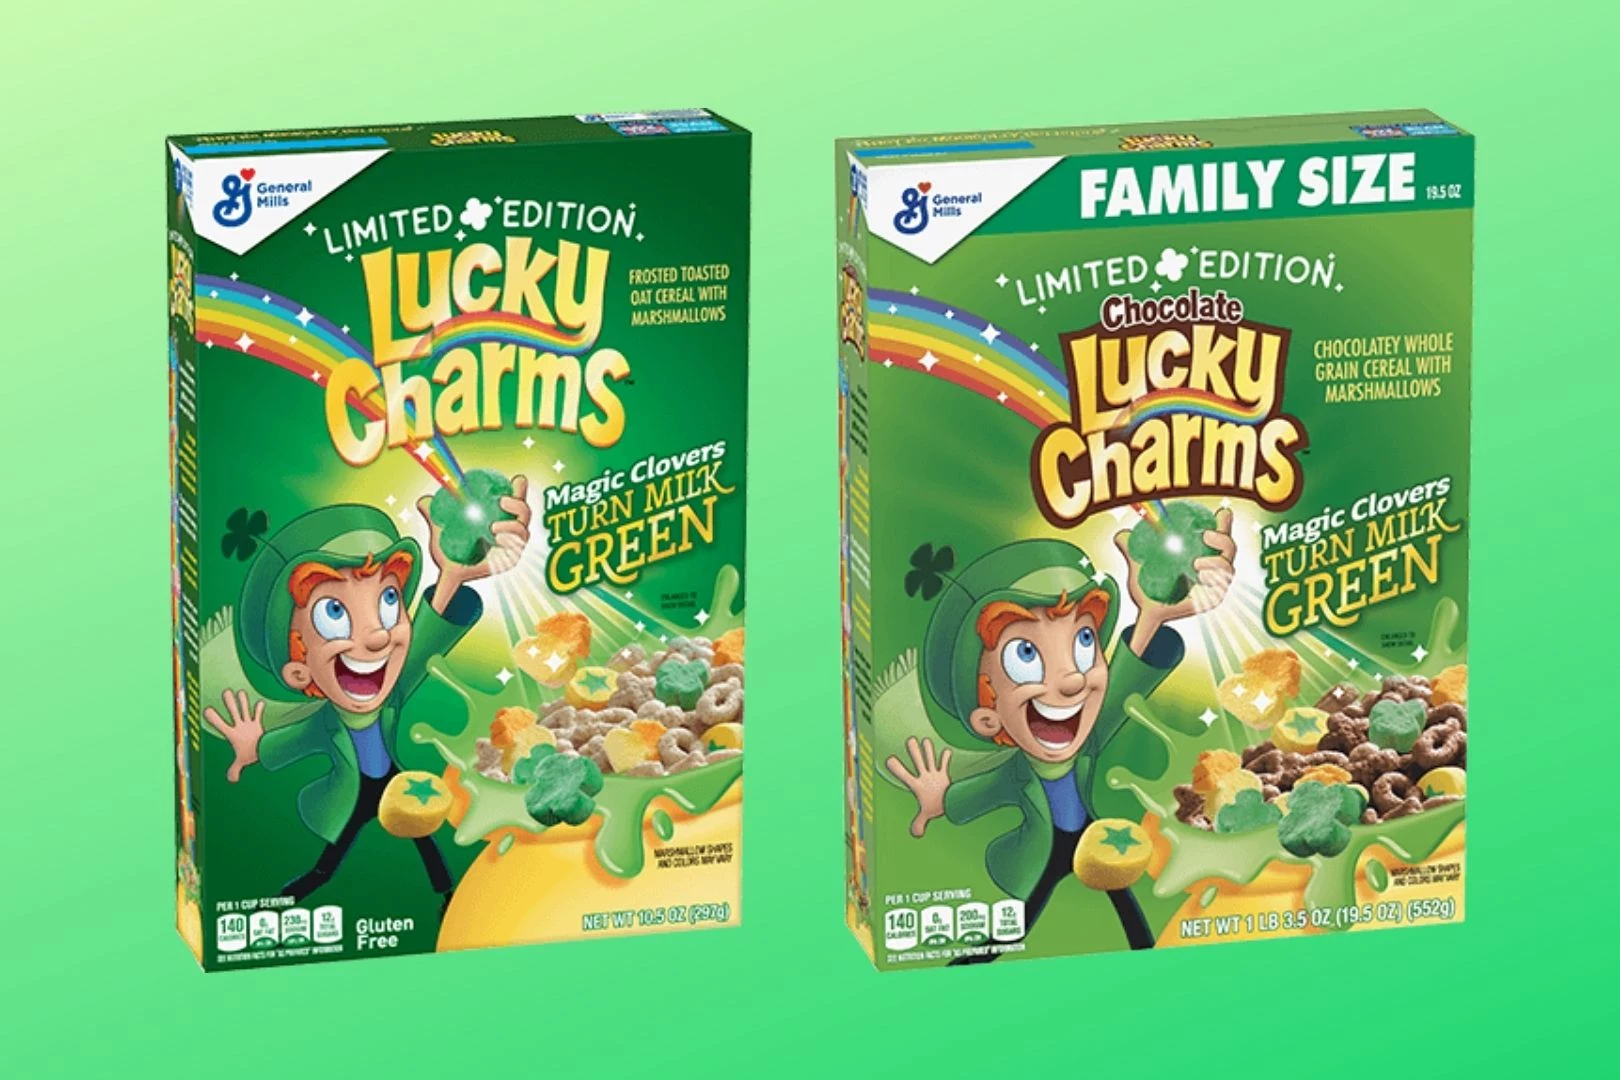 Review: St. Patrick's Day Edition Lucky Charms with Green Clovers Cereal -  Cerealously